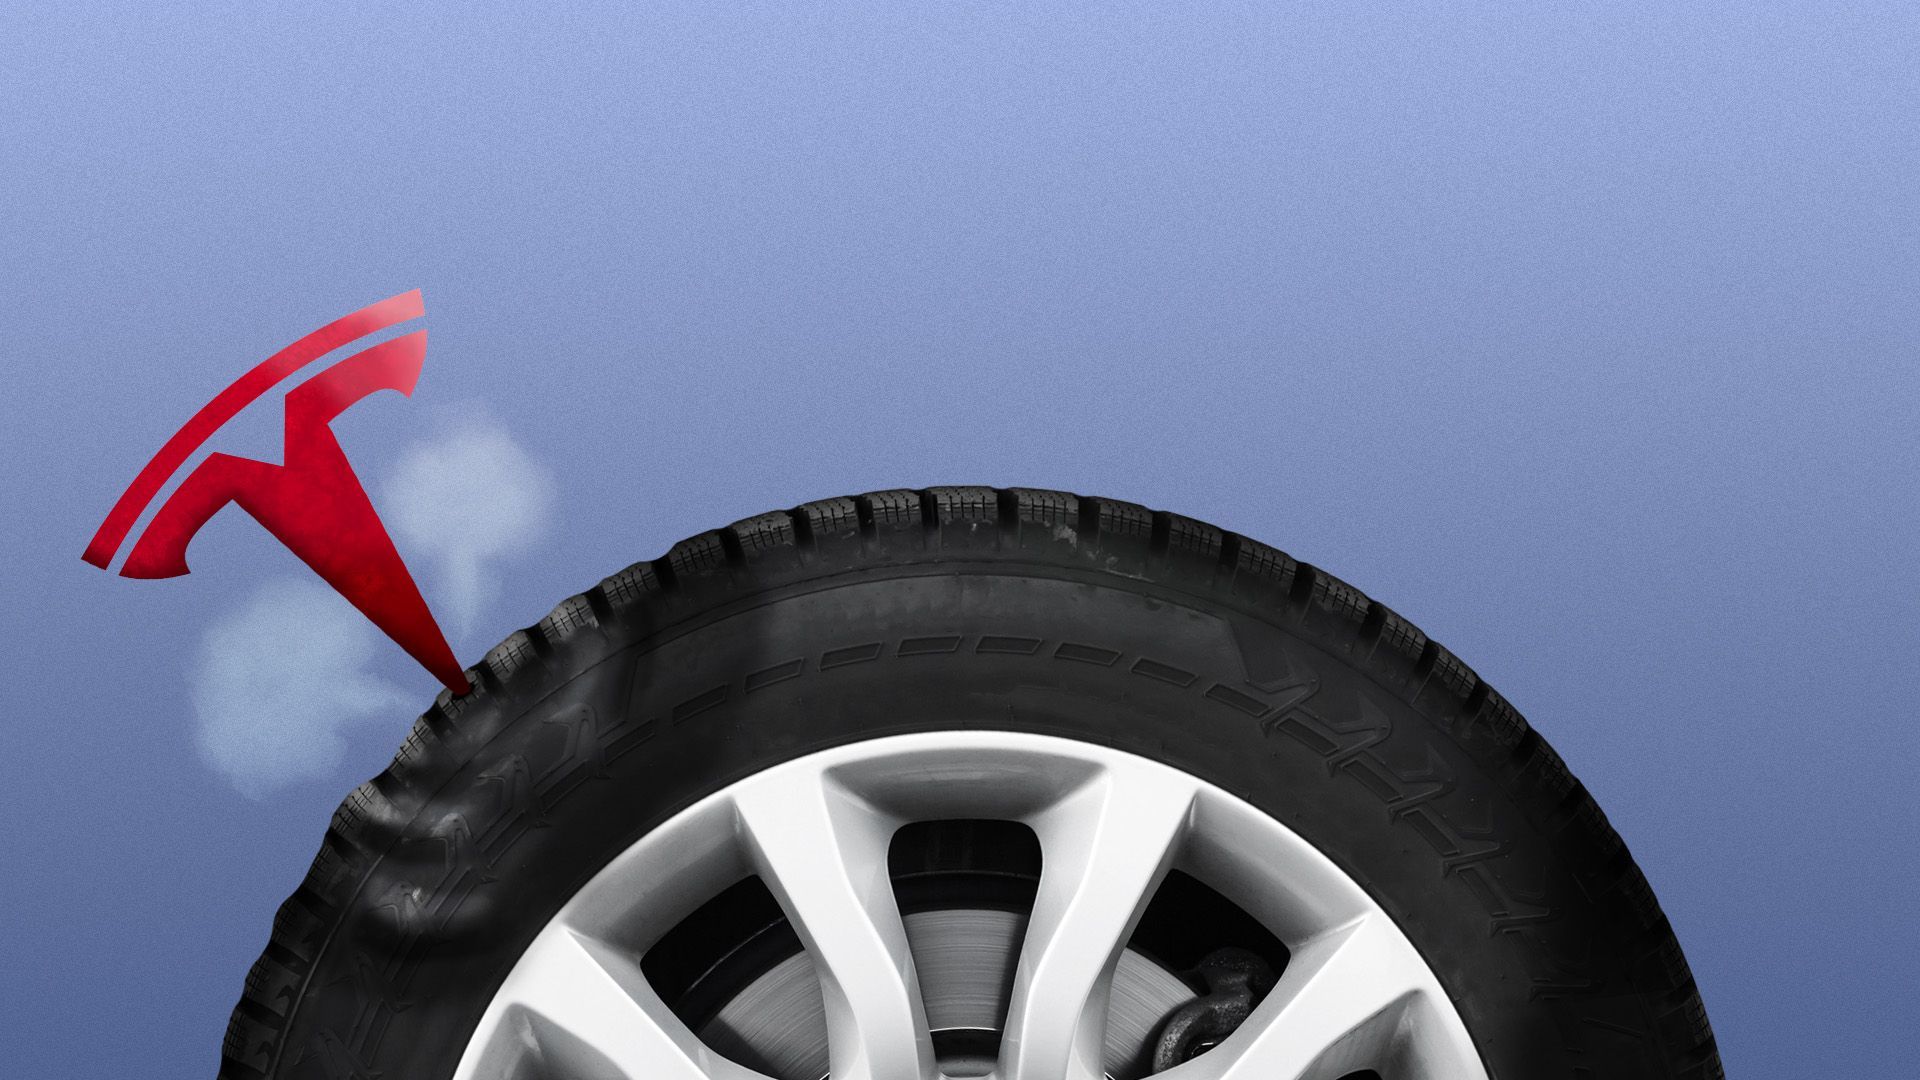 Illustration of the Tesla logo puncturing a tire like a nail